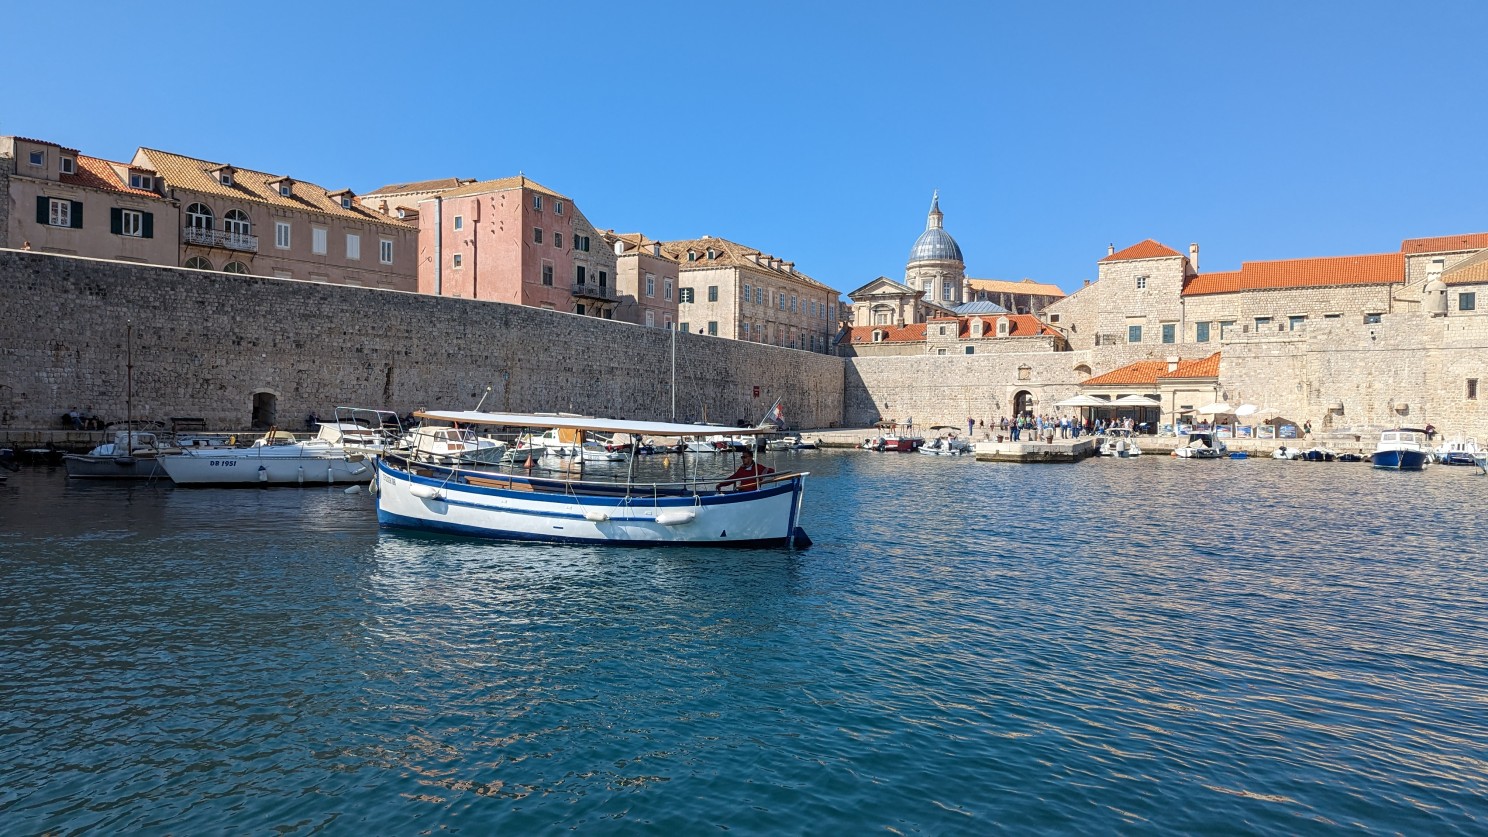 Dubrovnik, a really old, really walled city